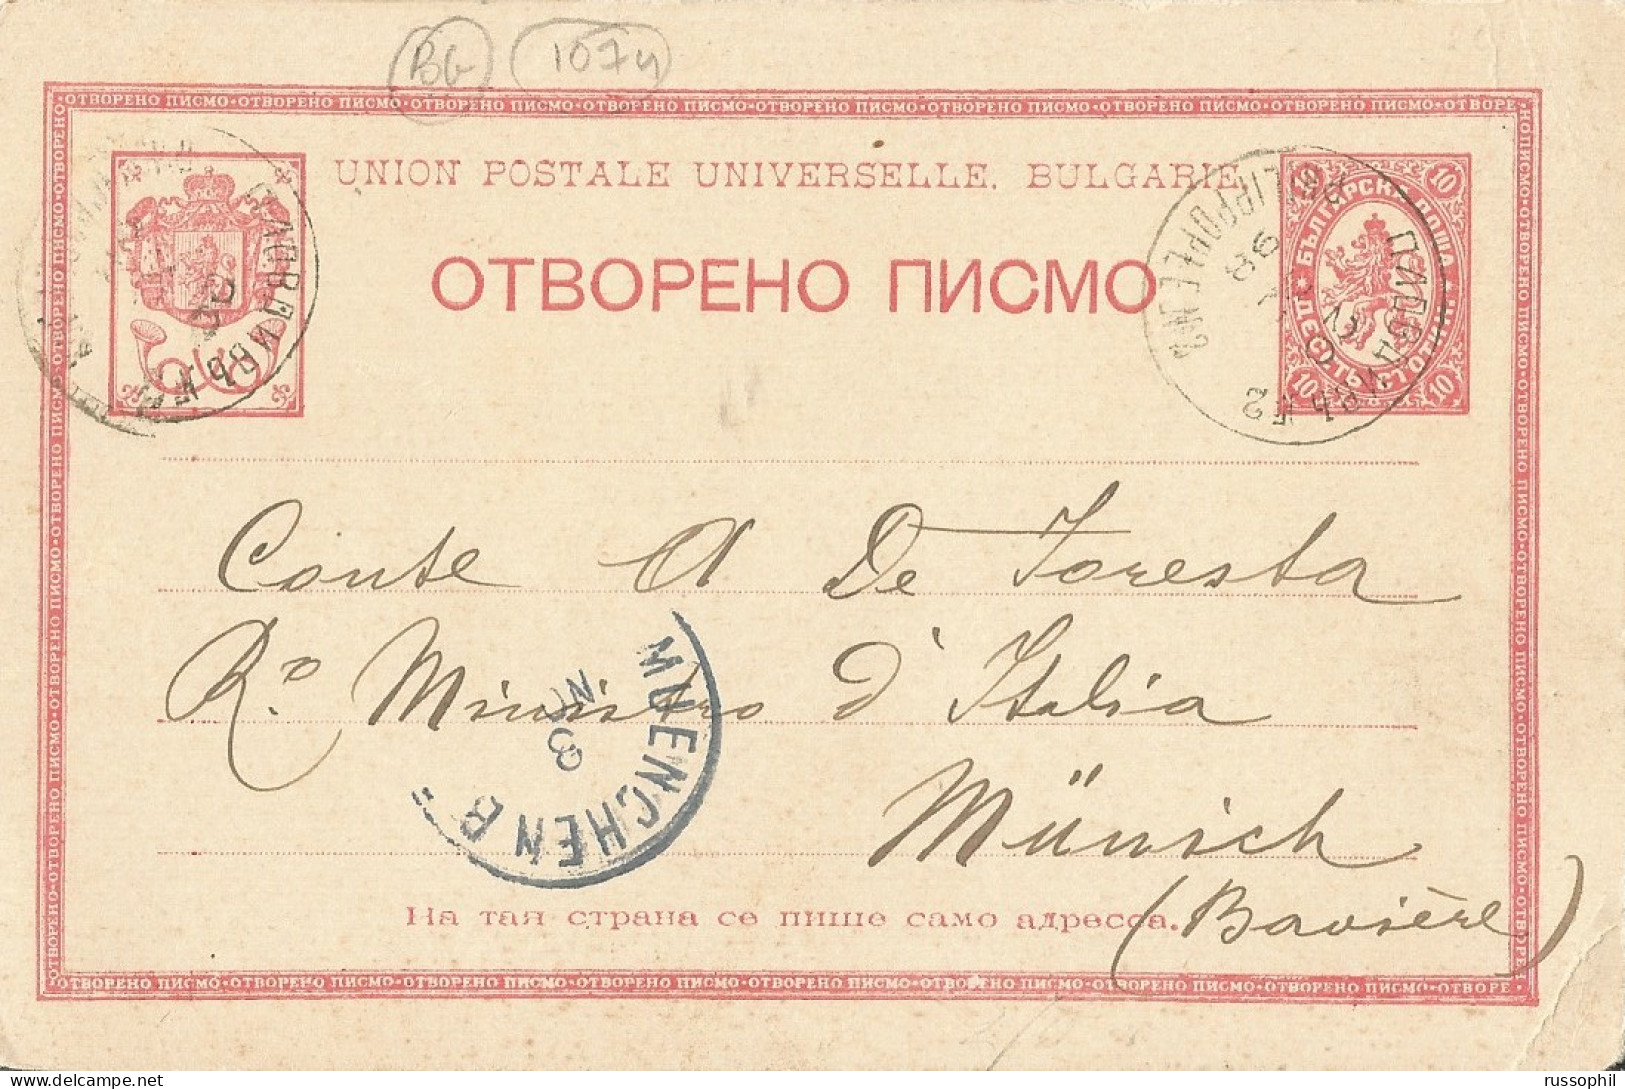 BULGARIA - RESPONSE CARD - OPEN LETTER - 1898 - Covers & Documents